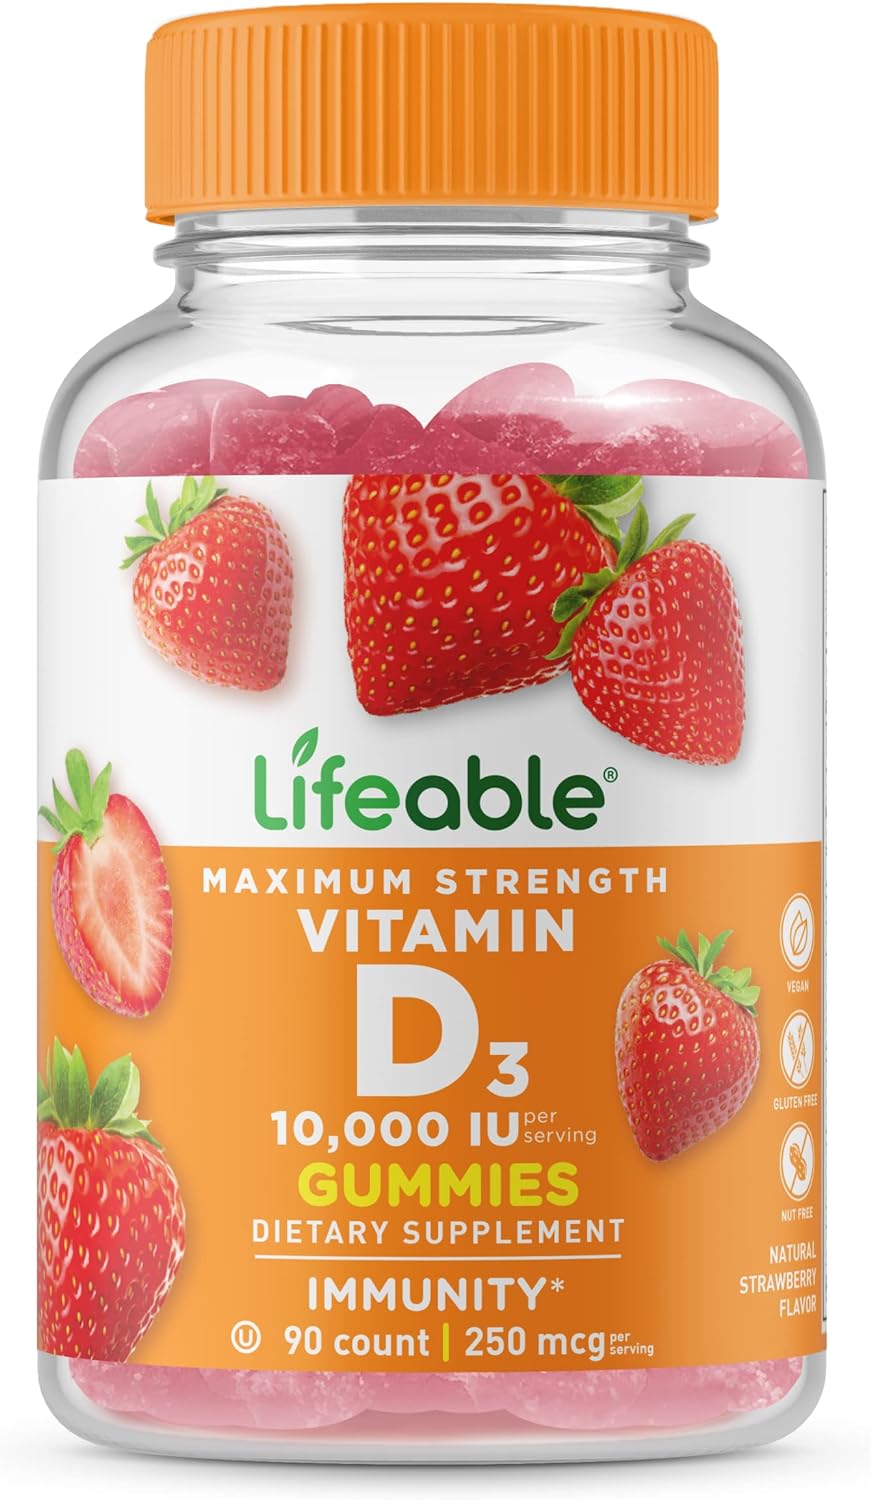 Lifeable Vitamin D3 10000 IU - Great Tasting Natural Flavor Gummy Supplement - Gluten Free Vegetarian GMO-Free Chewable - for Strong and Healthy Bones - for Adults, Men, Women - 90 Gummies